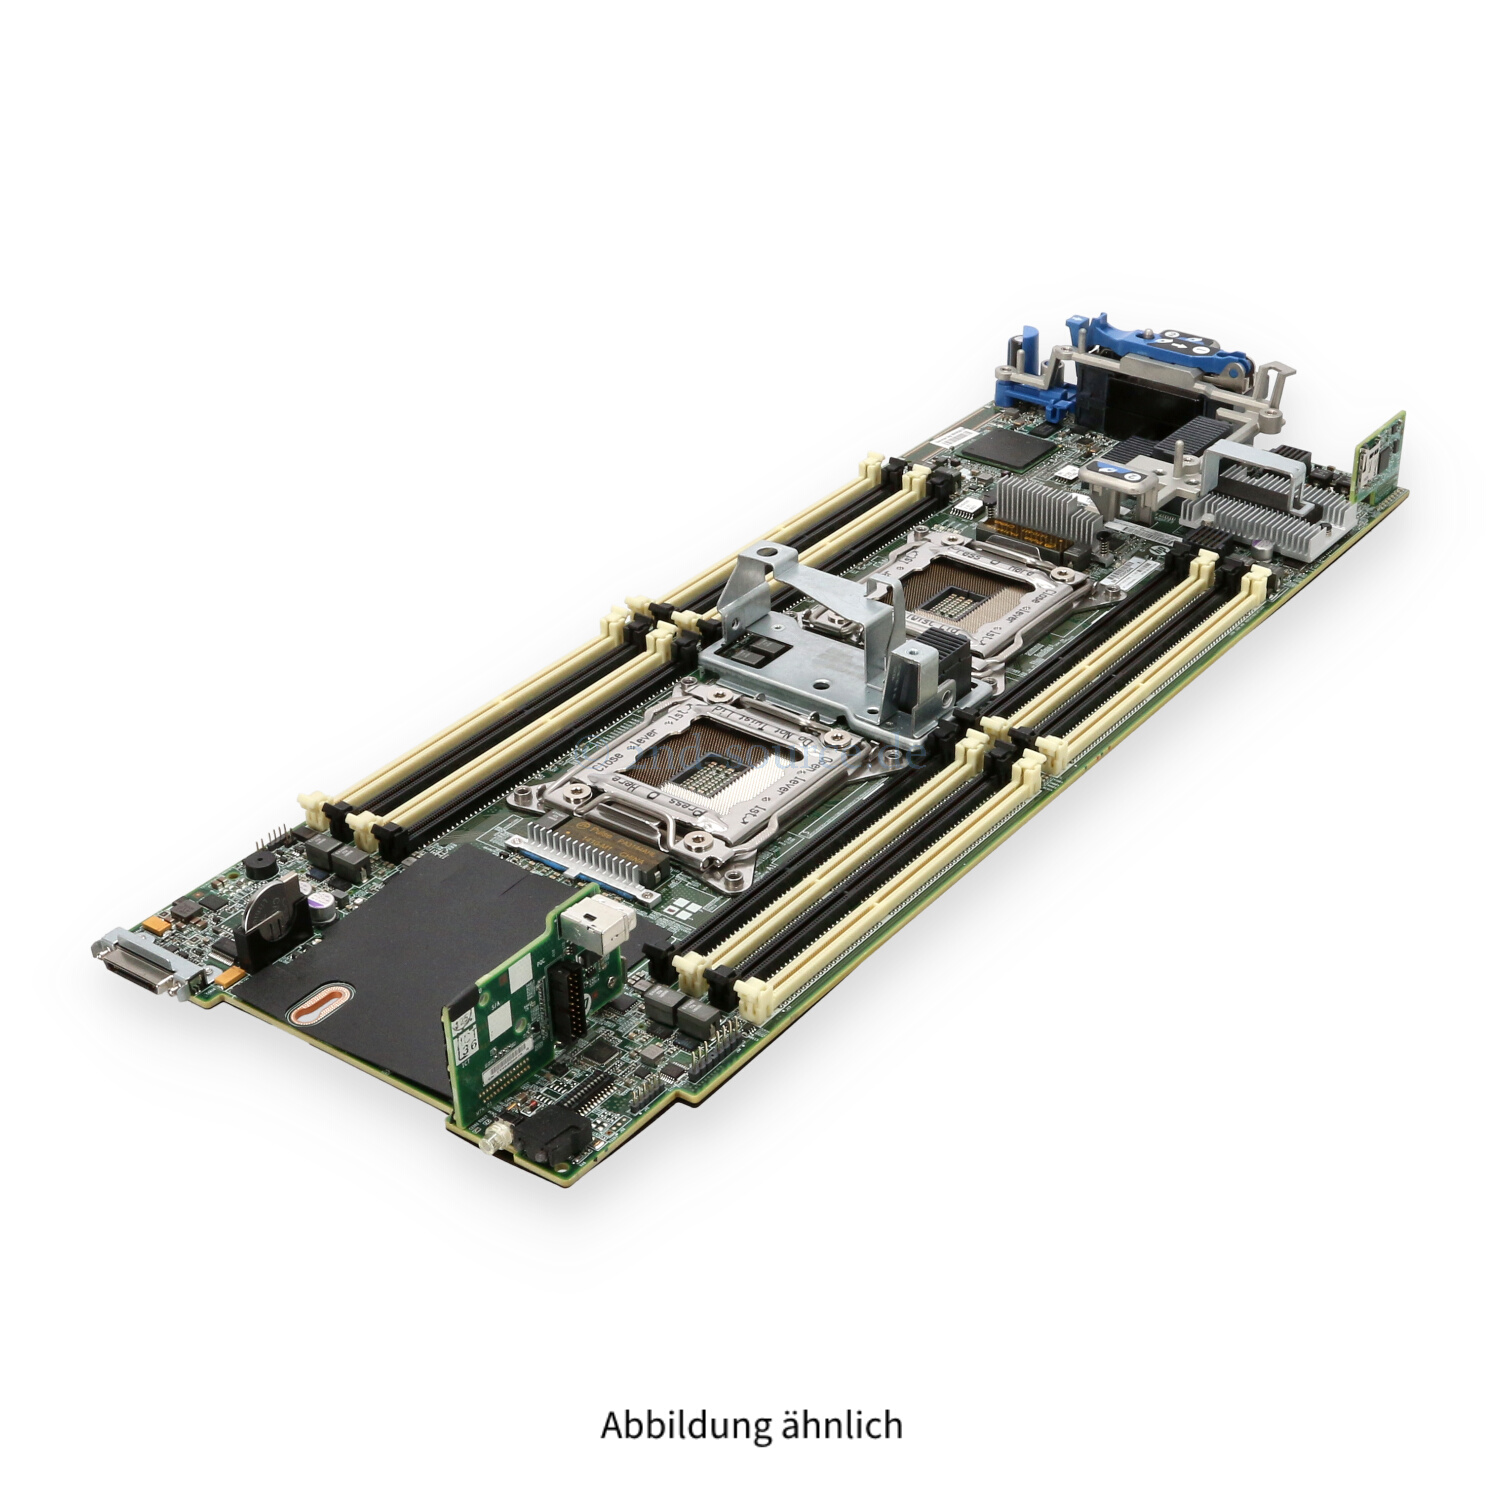 HPE Systemboard BL460c G8 719592-001